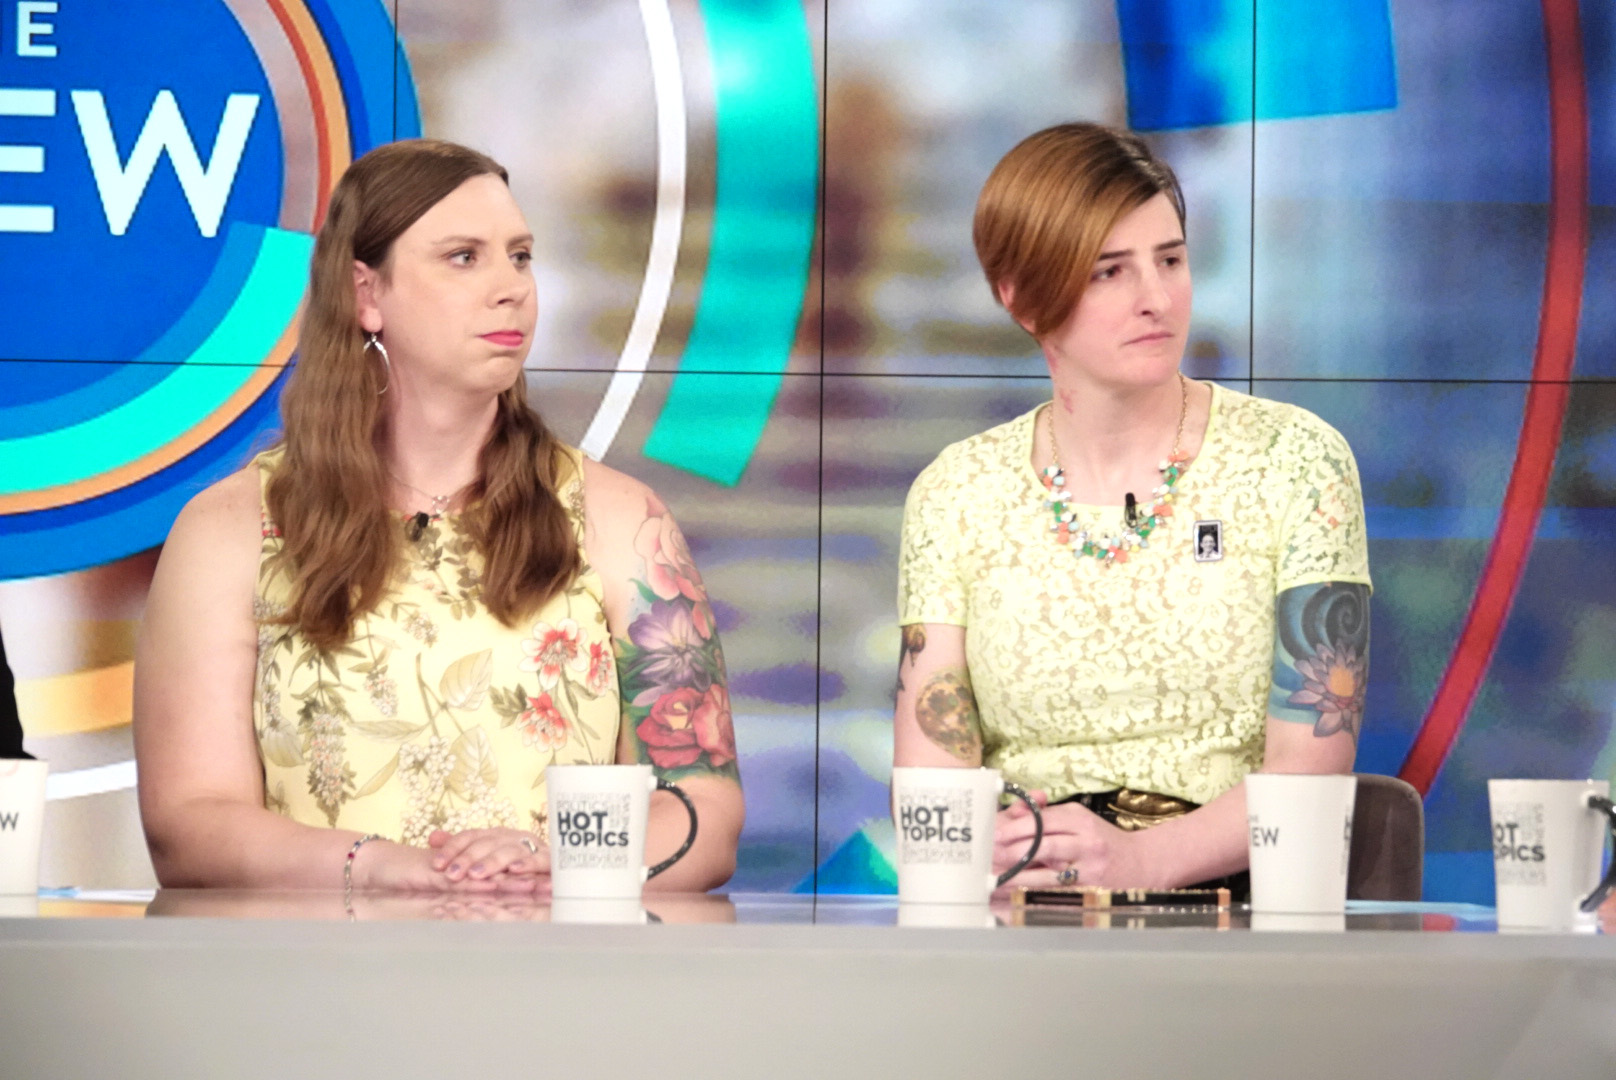 PHOTO: Sgt. Patricia King and Army Capt. Jennifer Peace talk about what's at stake for transgender troops with Trump's new policy at "The View" on Wednesday, April 10, 2019.